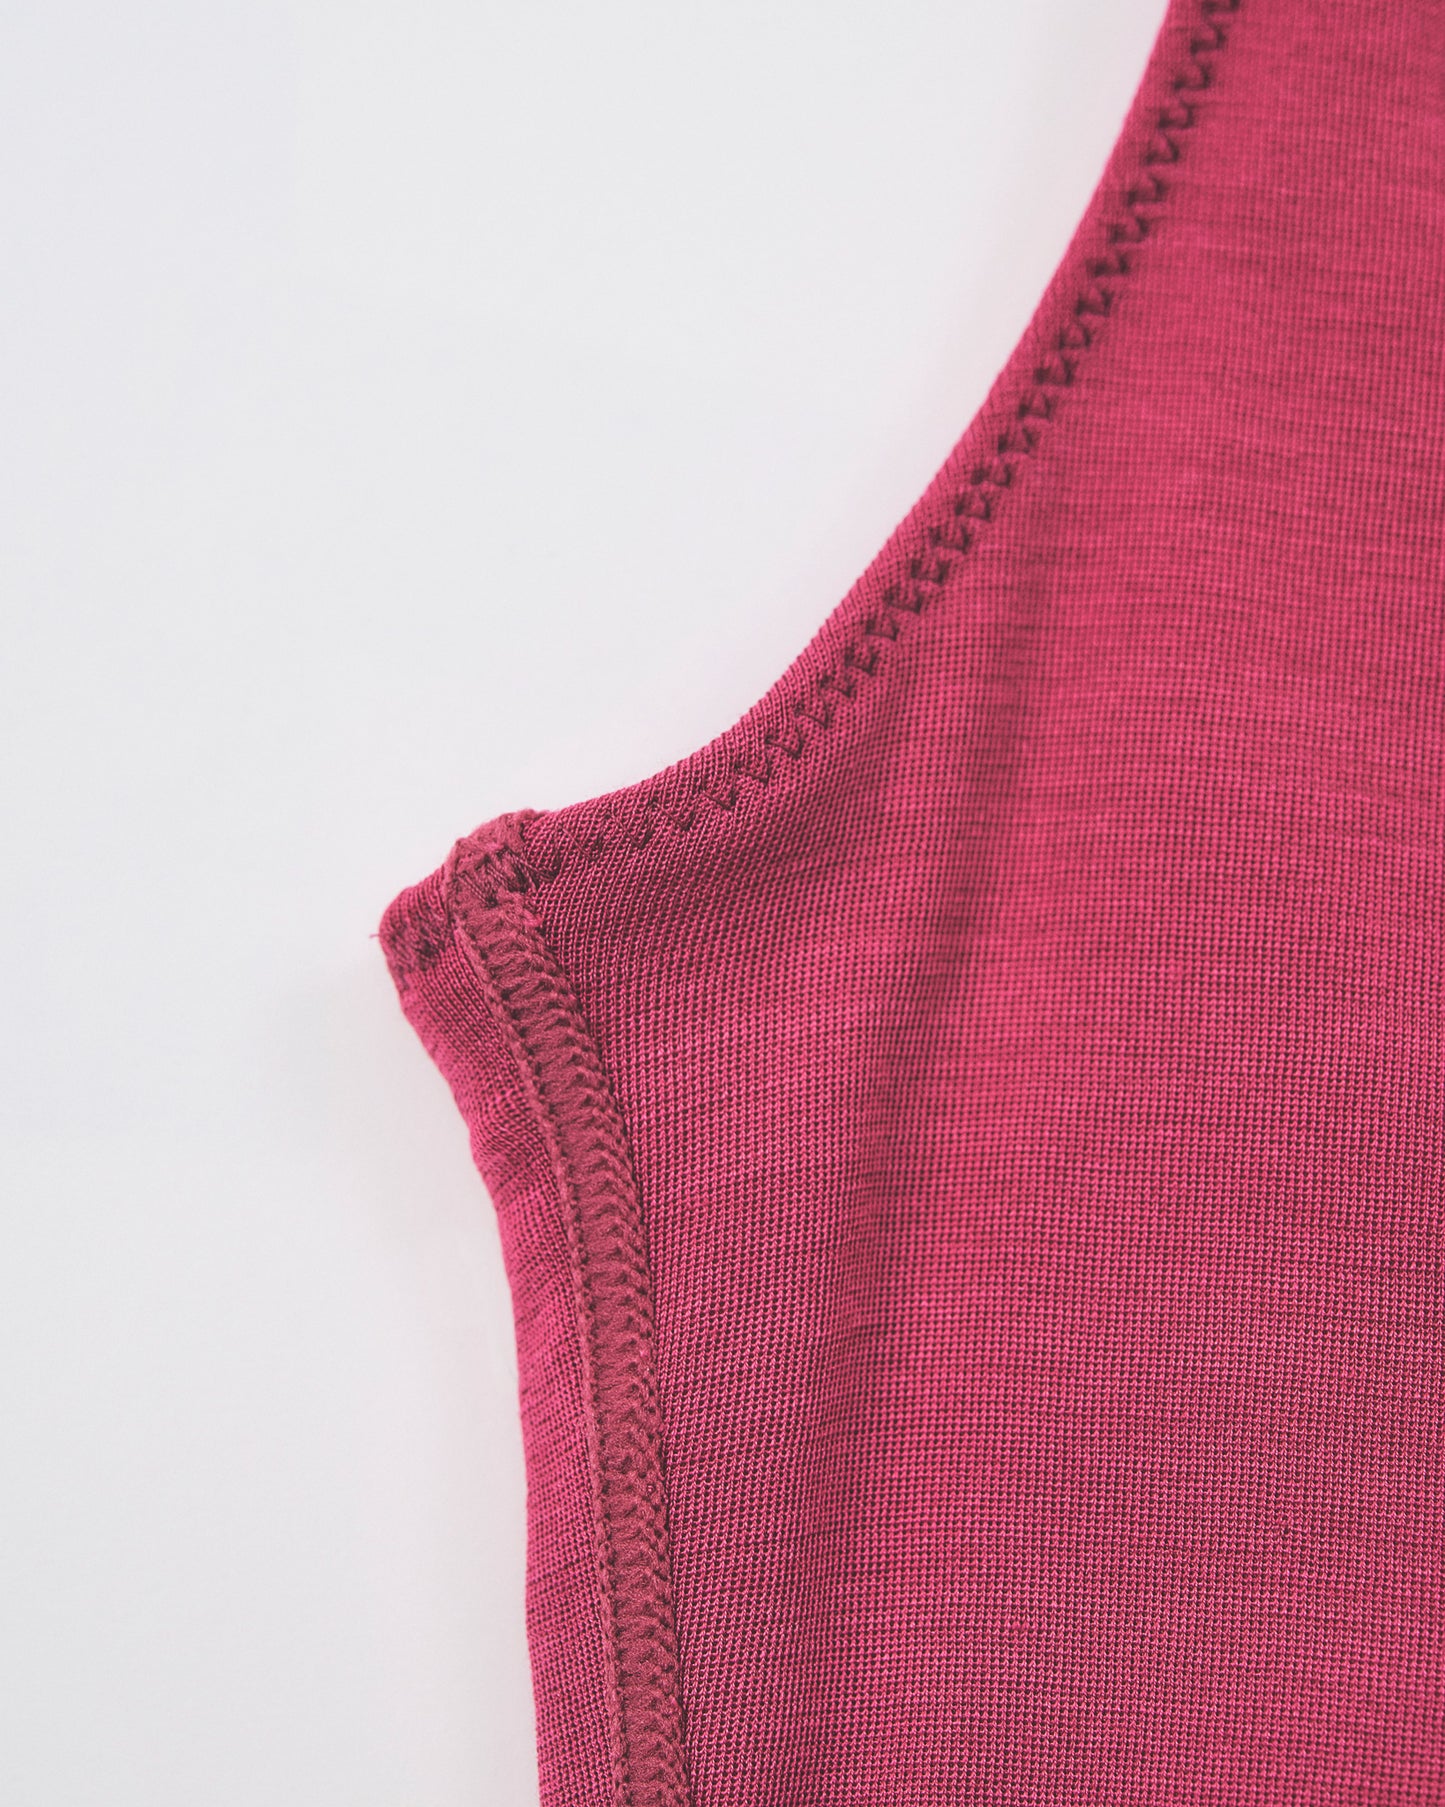 Washable Silk Tank Top #Pink